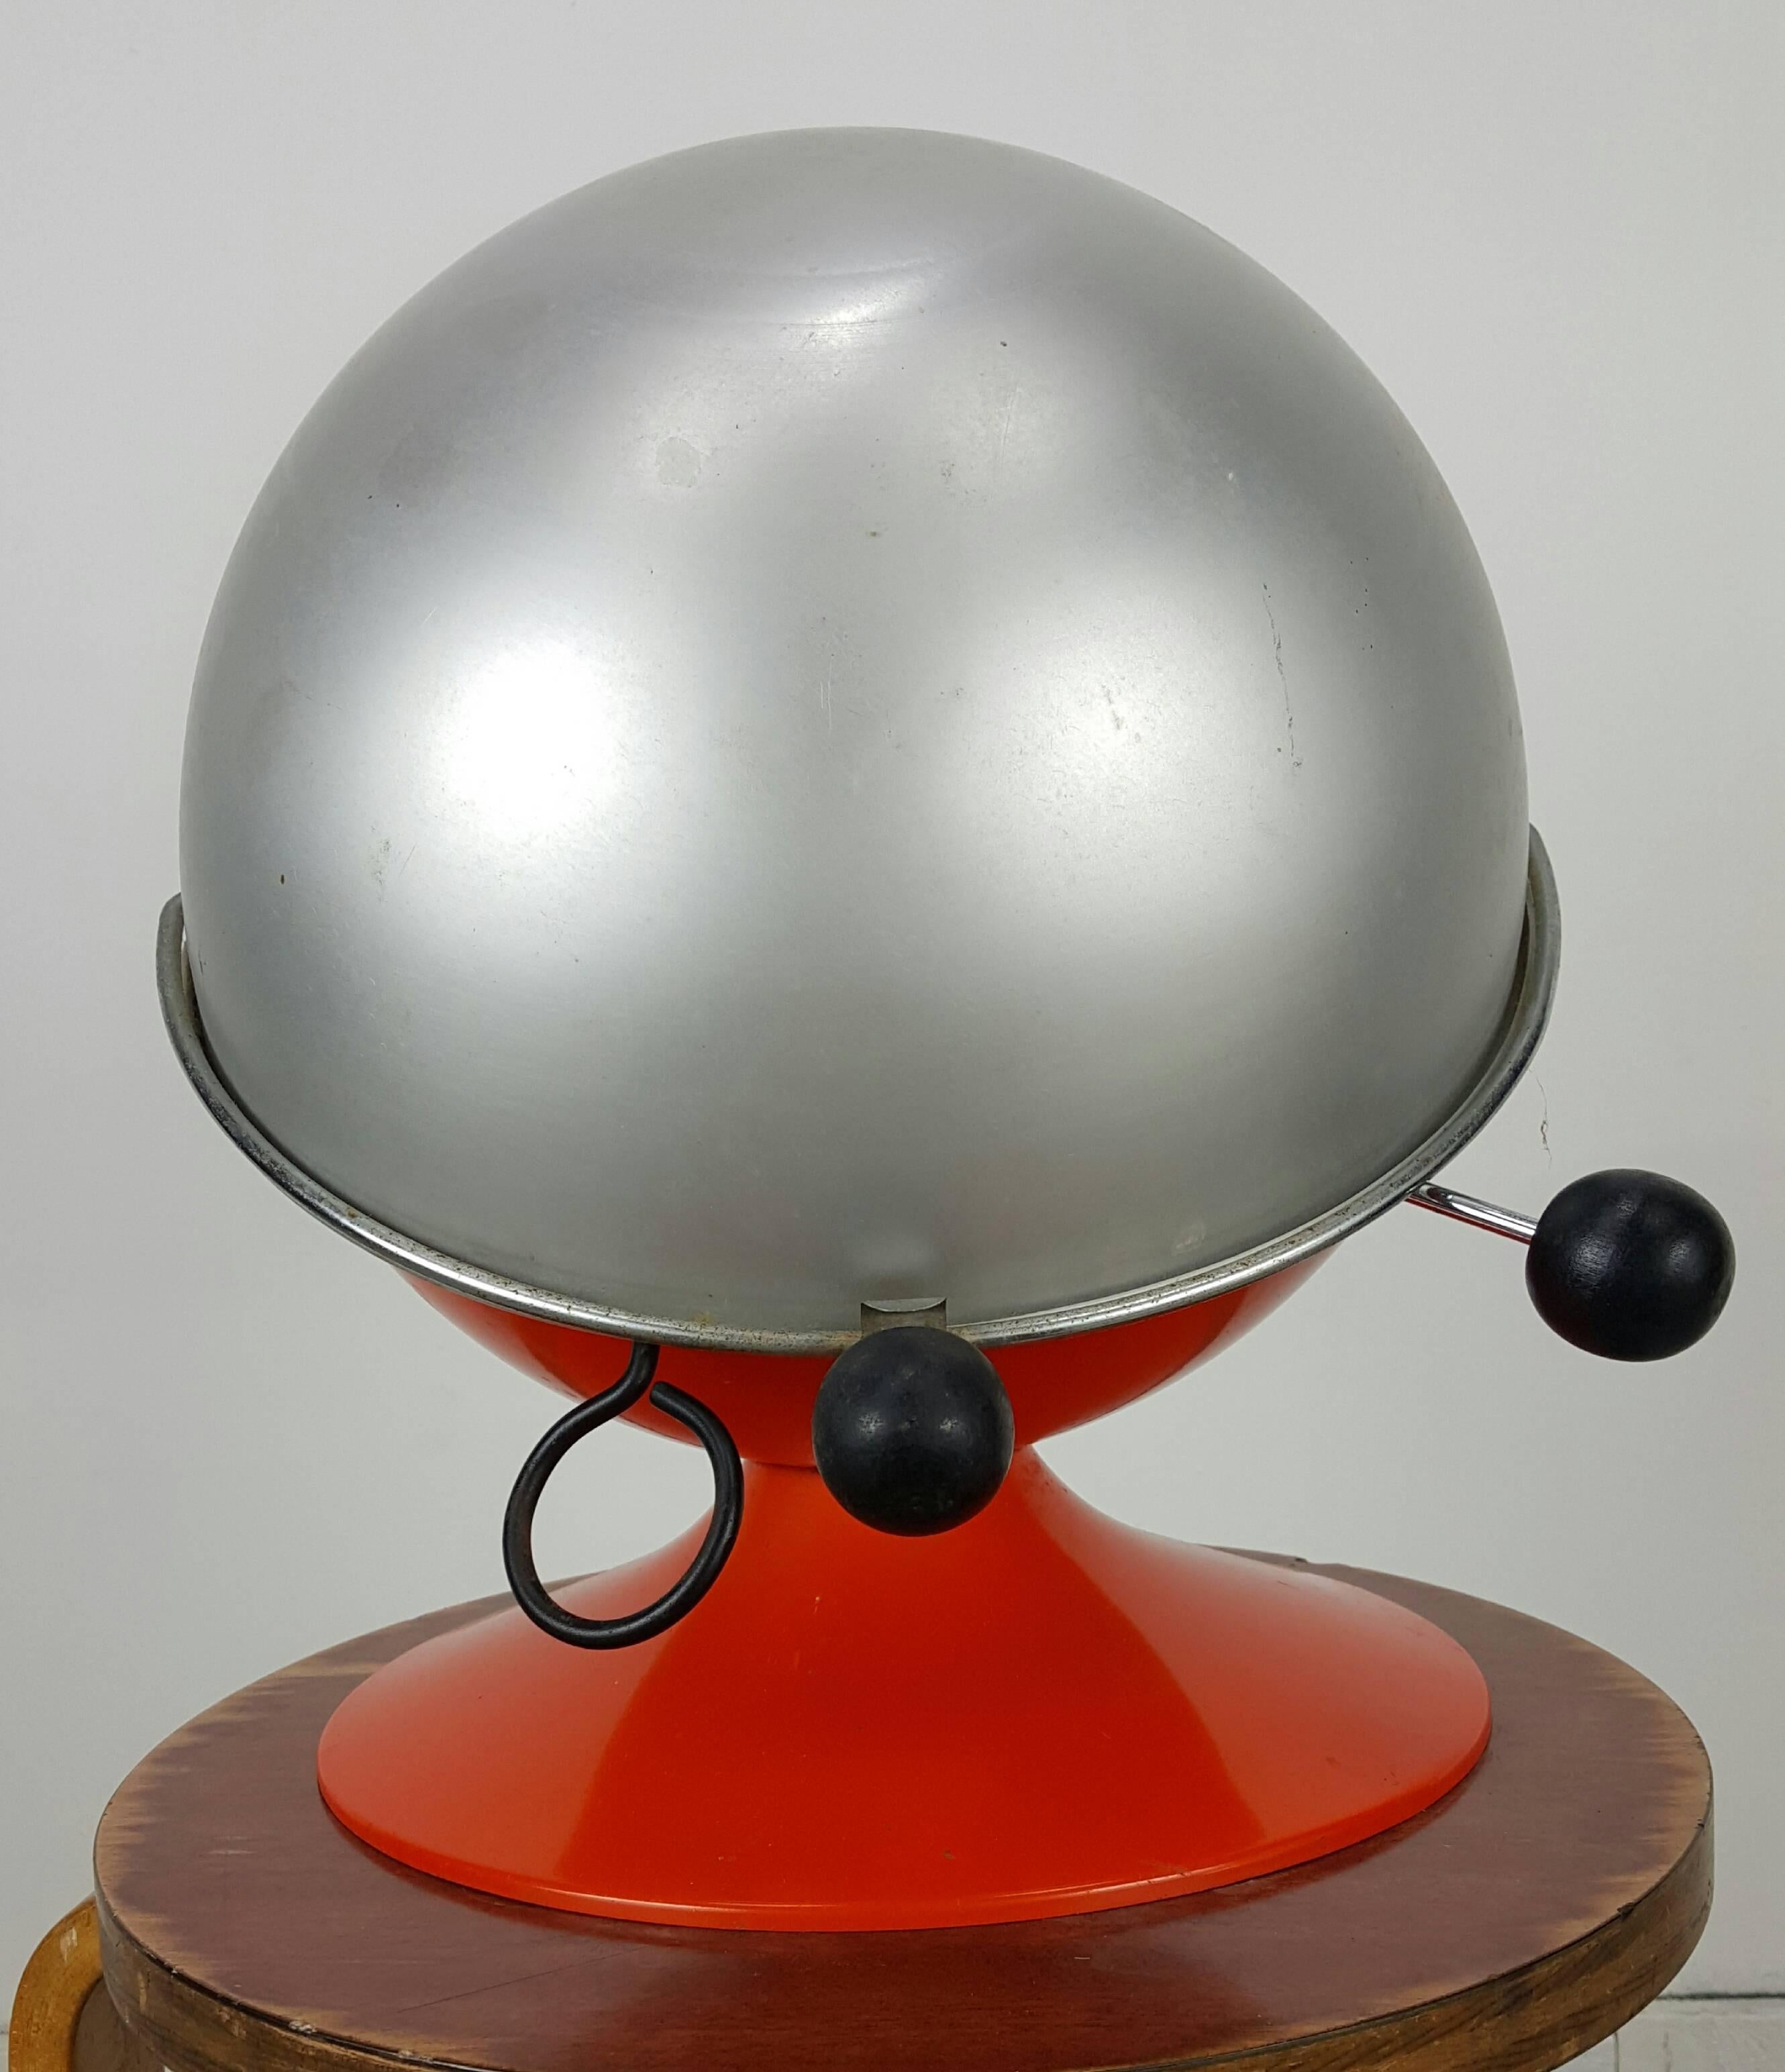 This is the rare tabletop version of the bright orange Ball-B-Q BBQ made by Shepherd. Wonderful original condition. Retains original orange enamel paint and aluminum ball top. Adjustable height grilling racks. Spage Age sculpture.